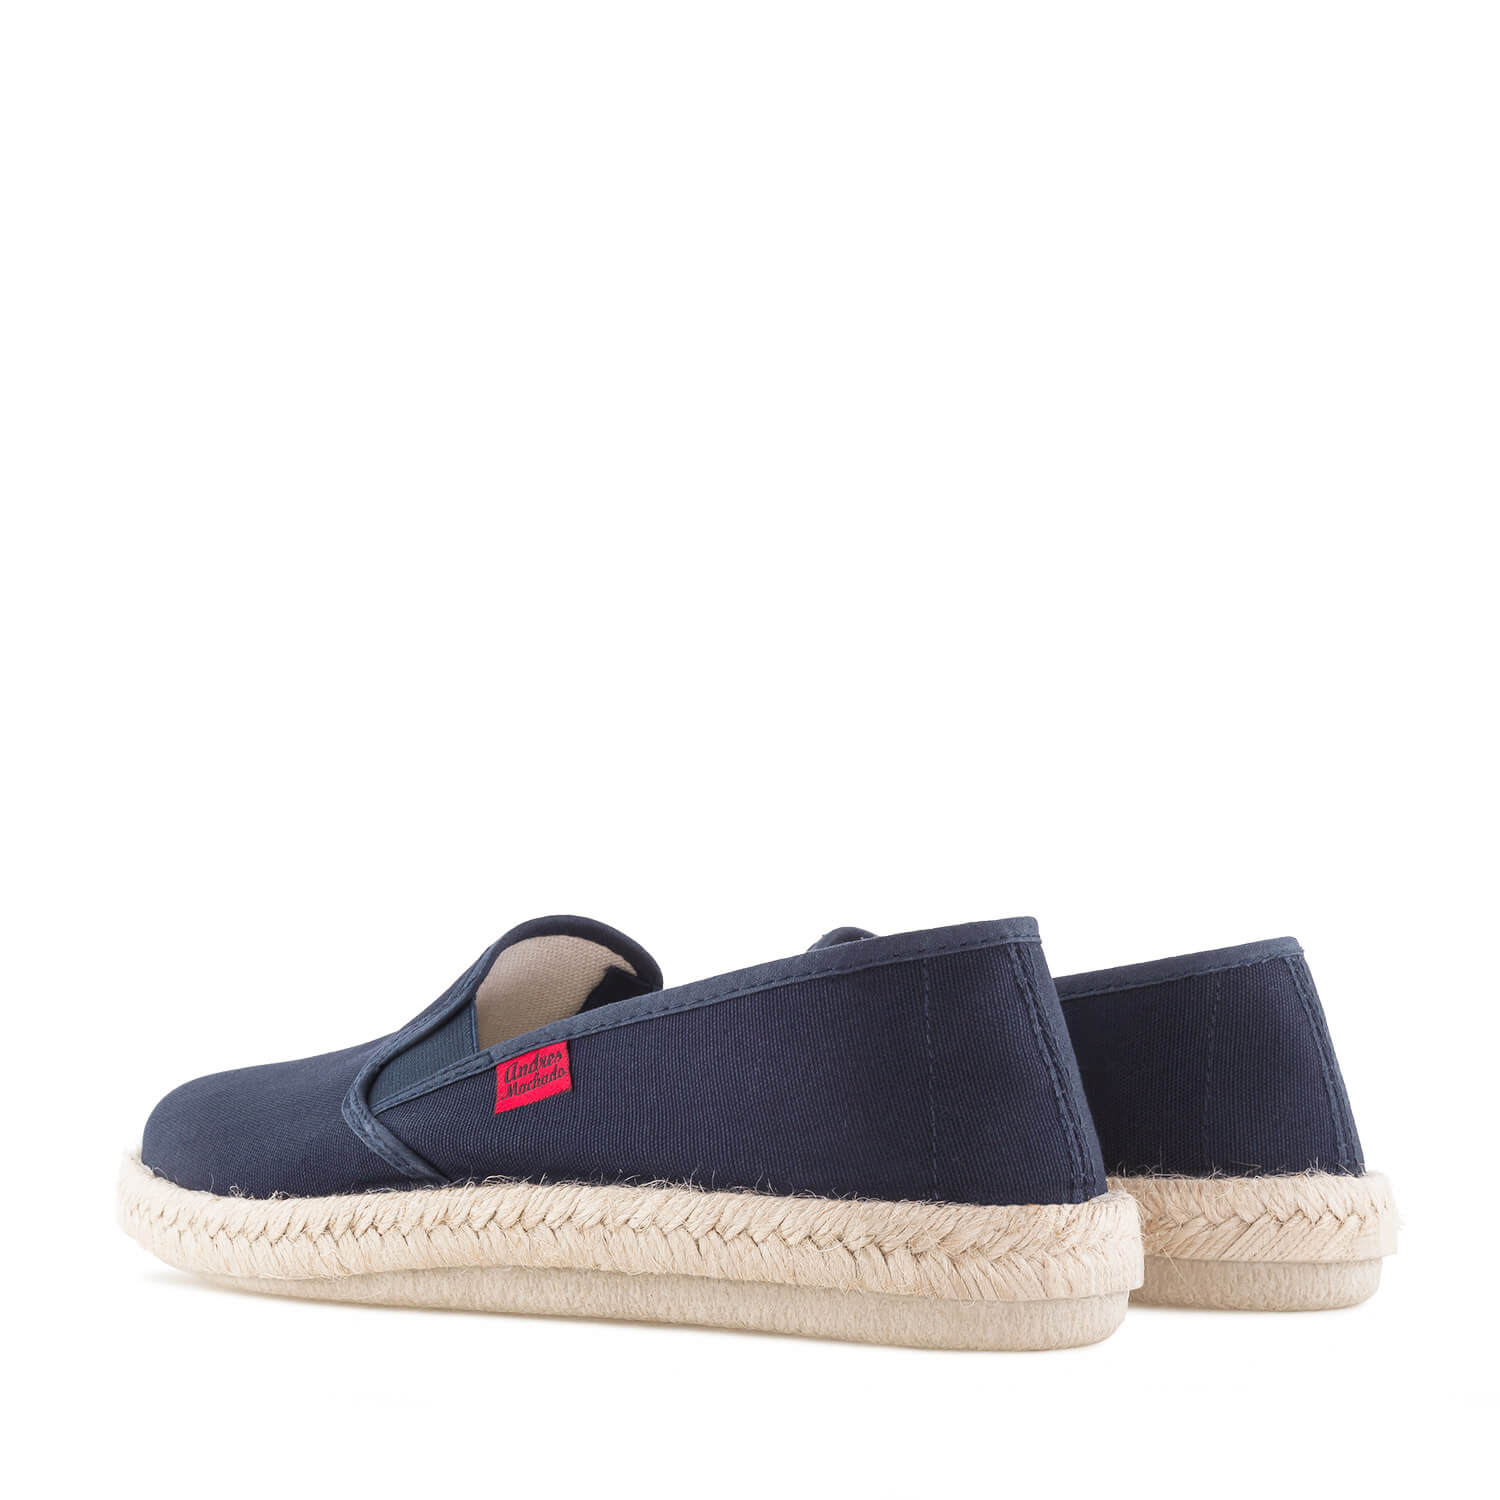 Mythical Navy Blue Canvas Slip-On Shoes with Jute and Rubber Sole 